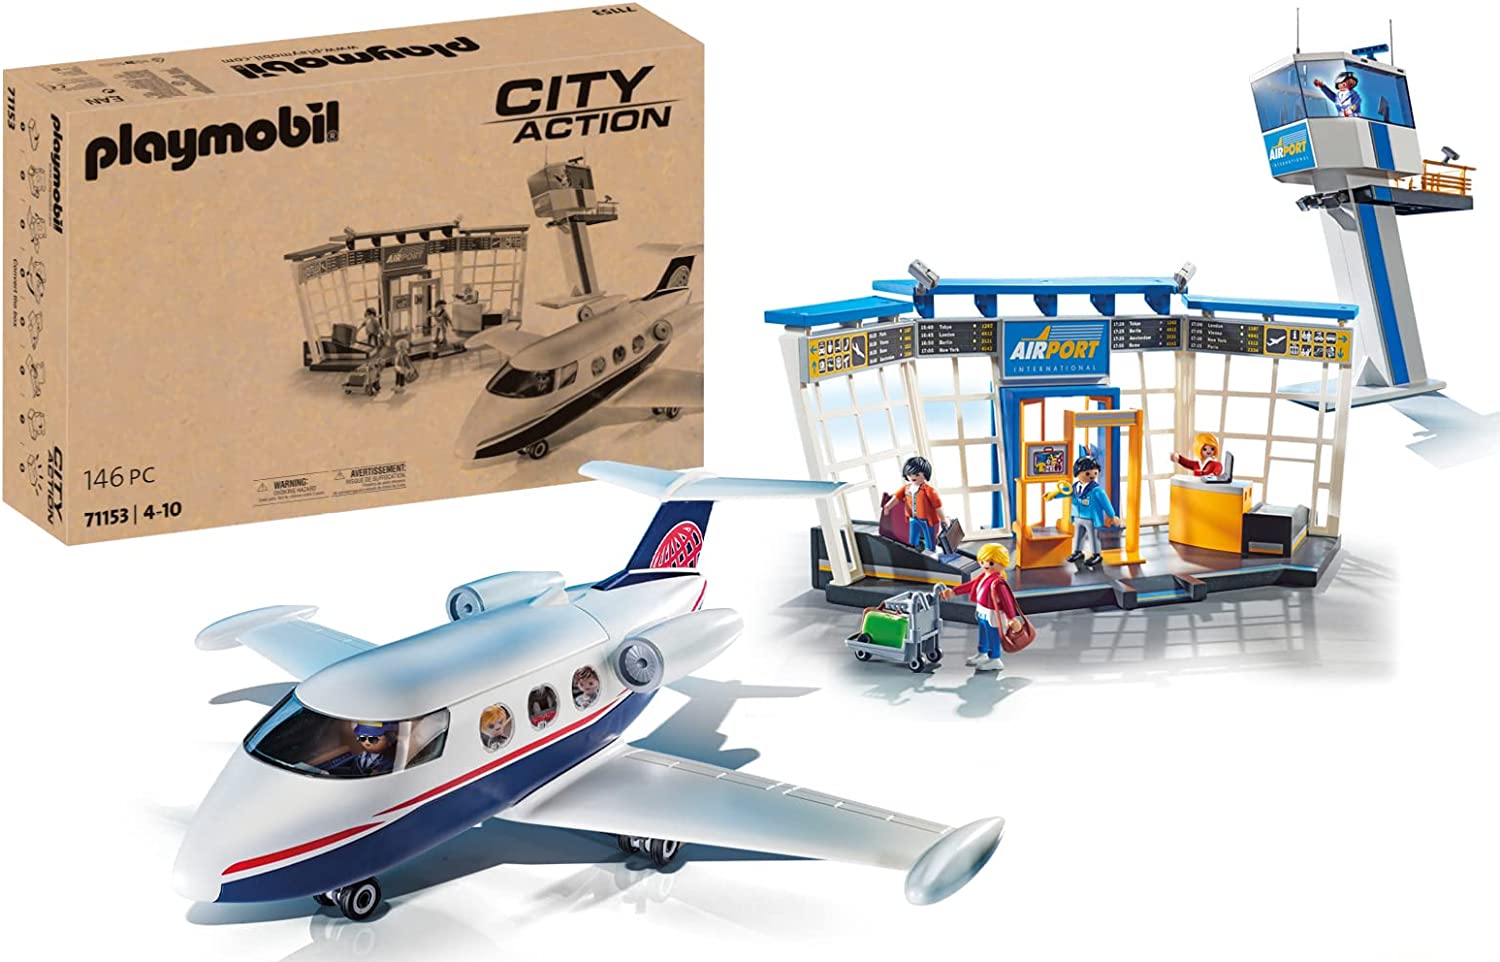 PLAYMOBIL City Action 71153 Airport with Aeroplane and Tower, with 2 in 1 Reversible Box as Eco-Friendly Packaging, Toy for Children from 4 Years [Exclusive to Amazon]